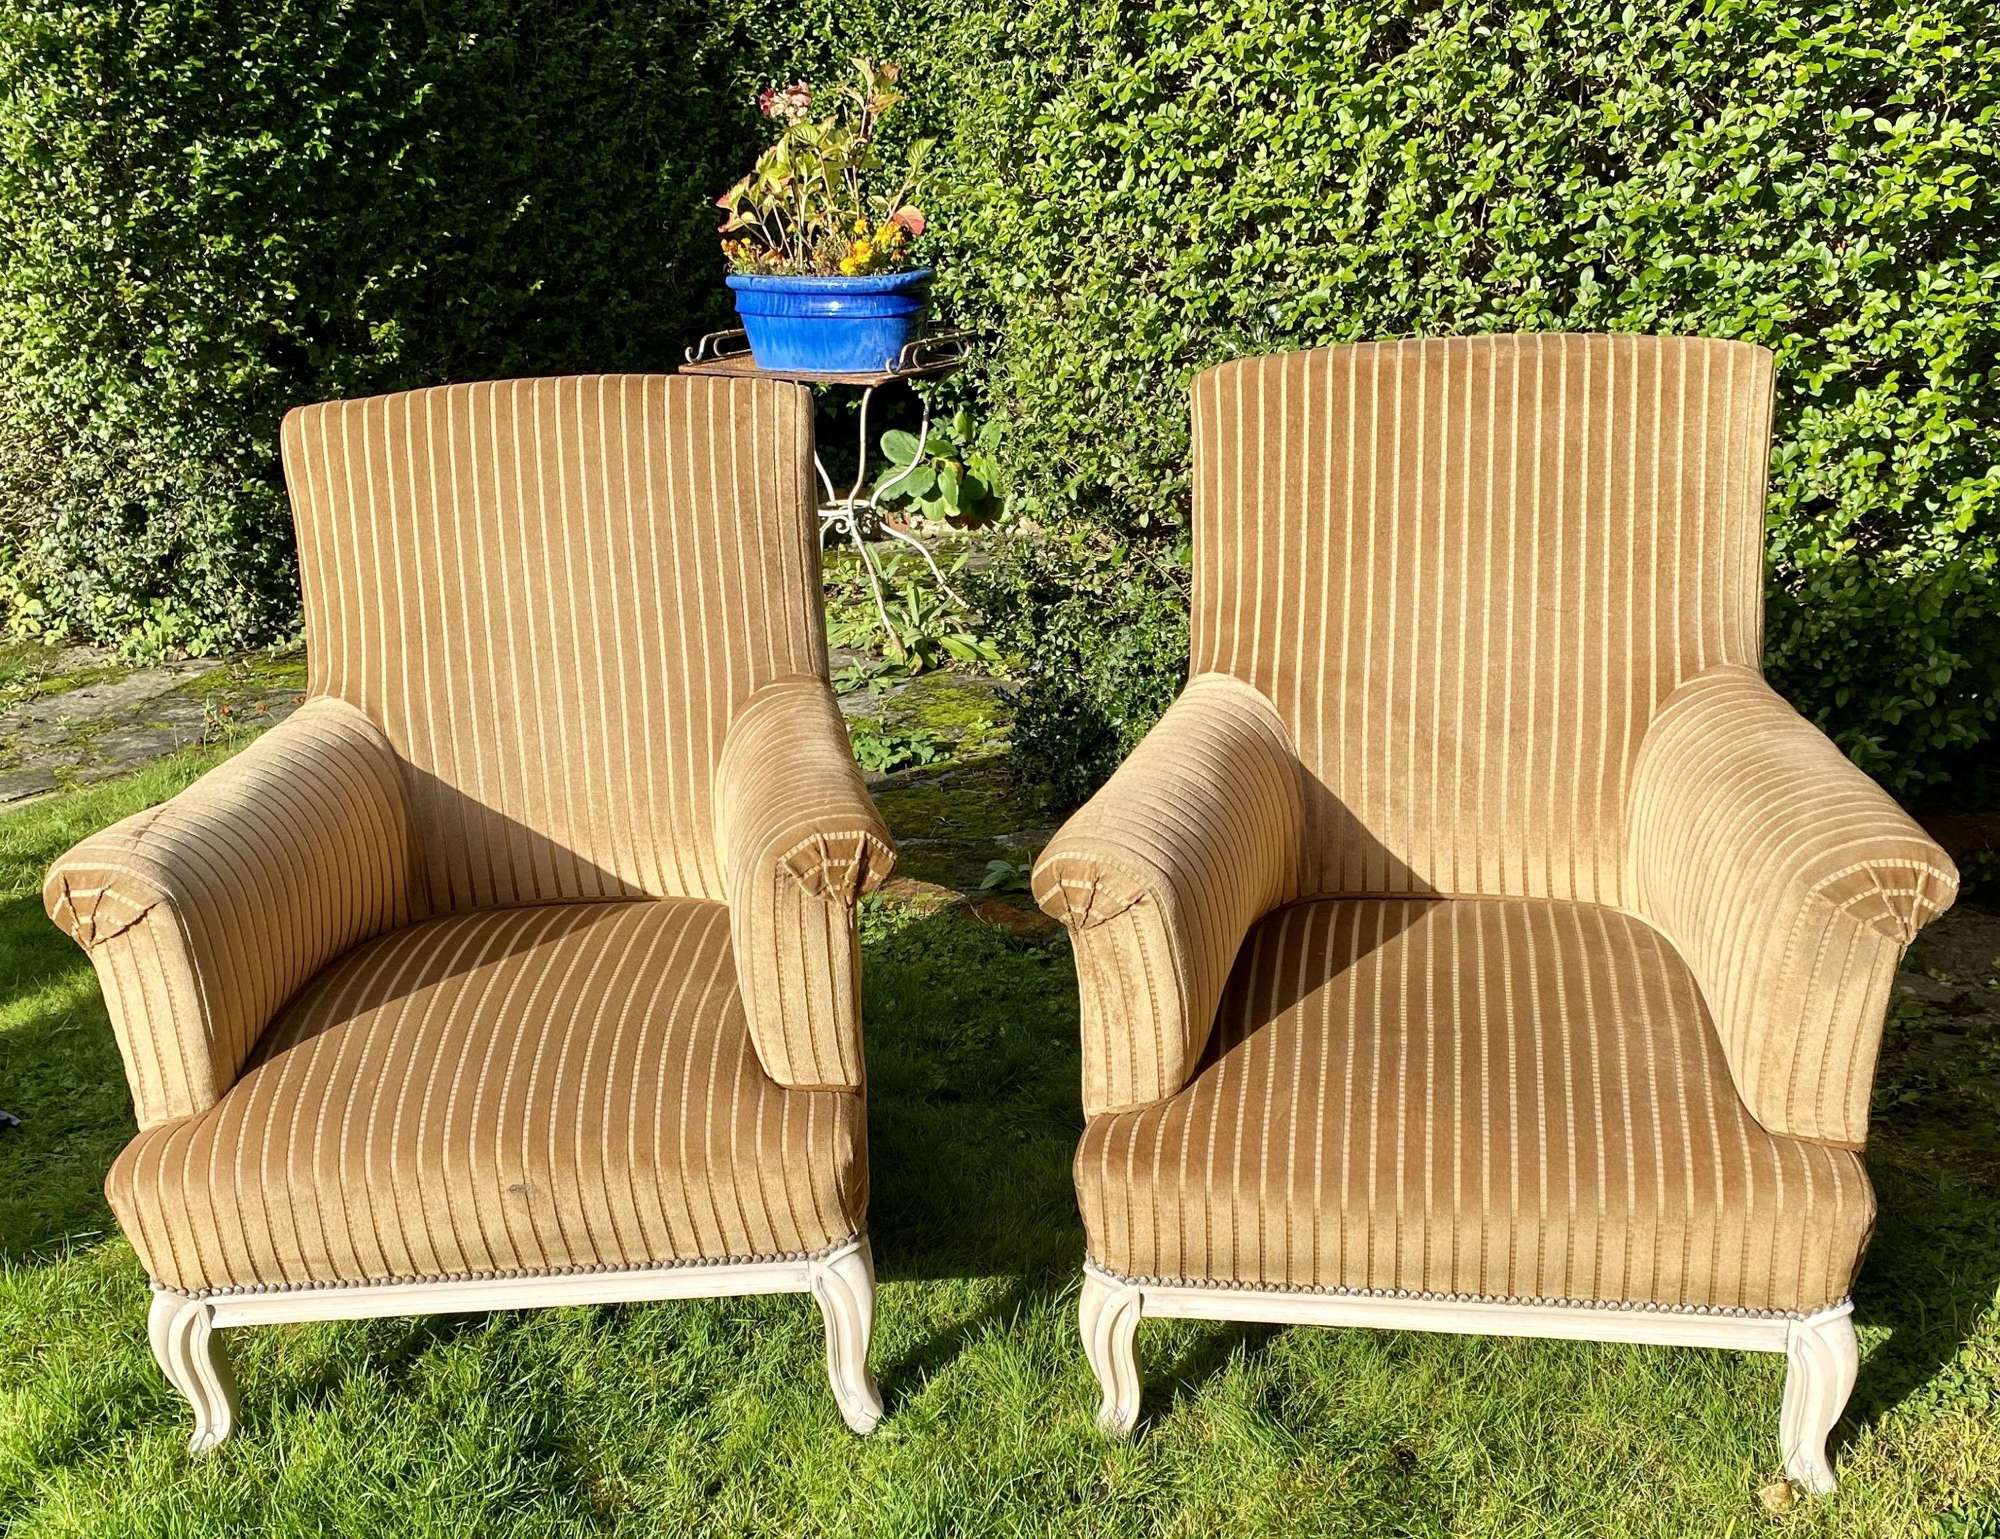 Pair of large upholstered armchairs